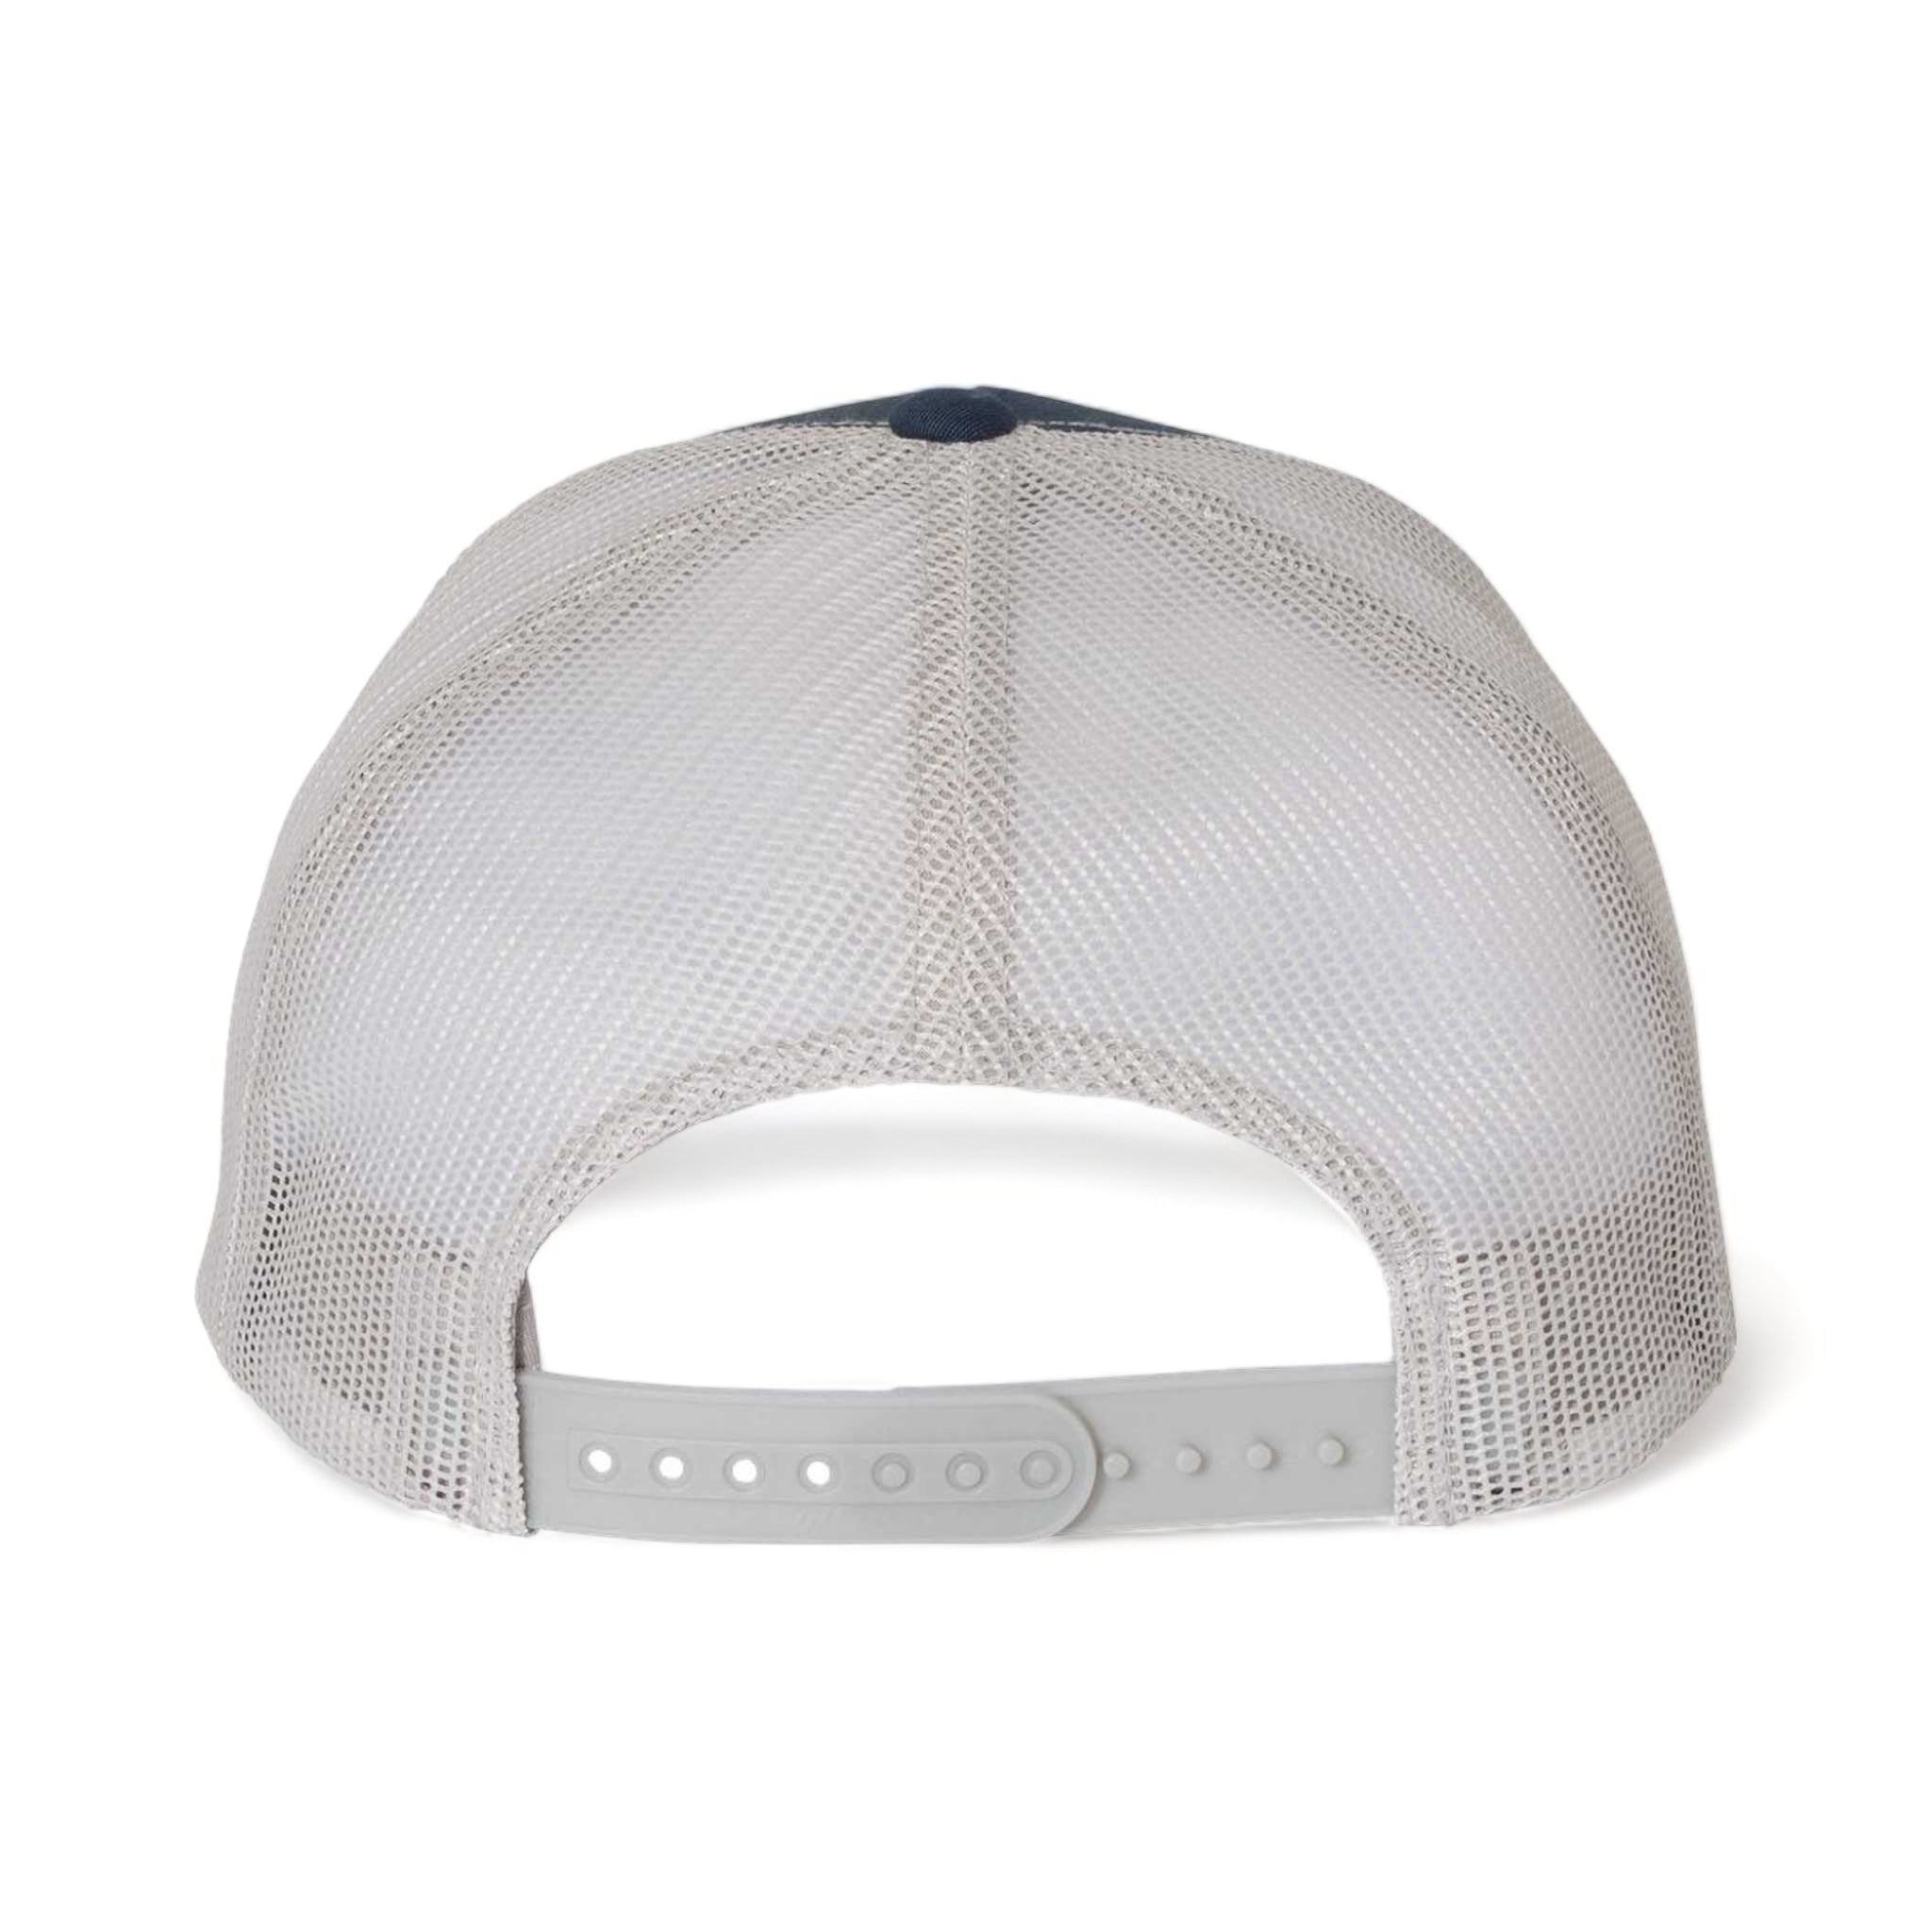 Back view of YP Classics 6606 custom hat in navy and silver